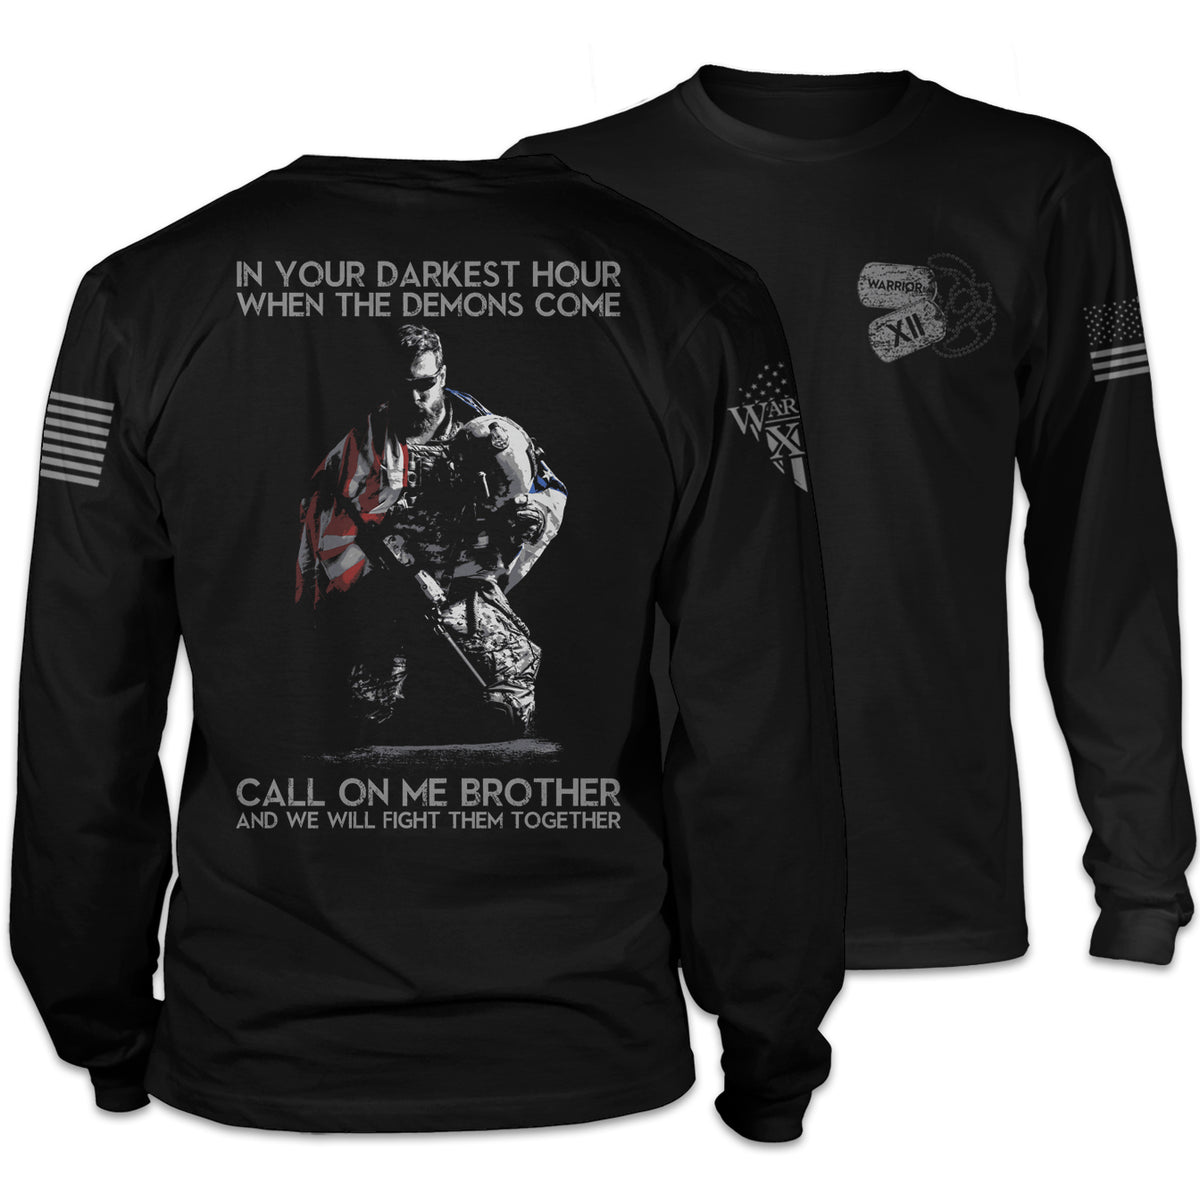 Front & back black long sleeve shirt with the words "In your darkest hour when the demons come, call on me, brother, and we will fight them together" with a soldier printed on the shirt.